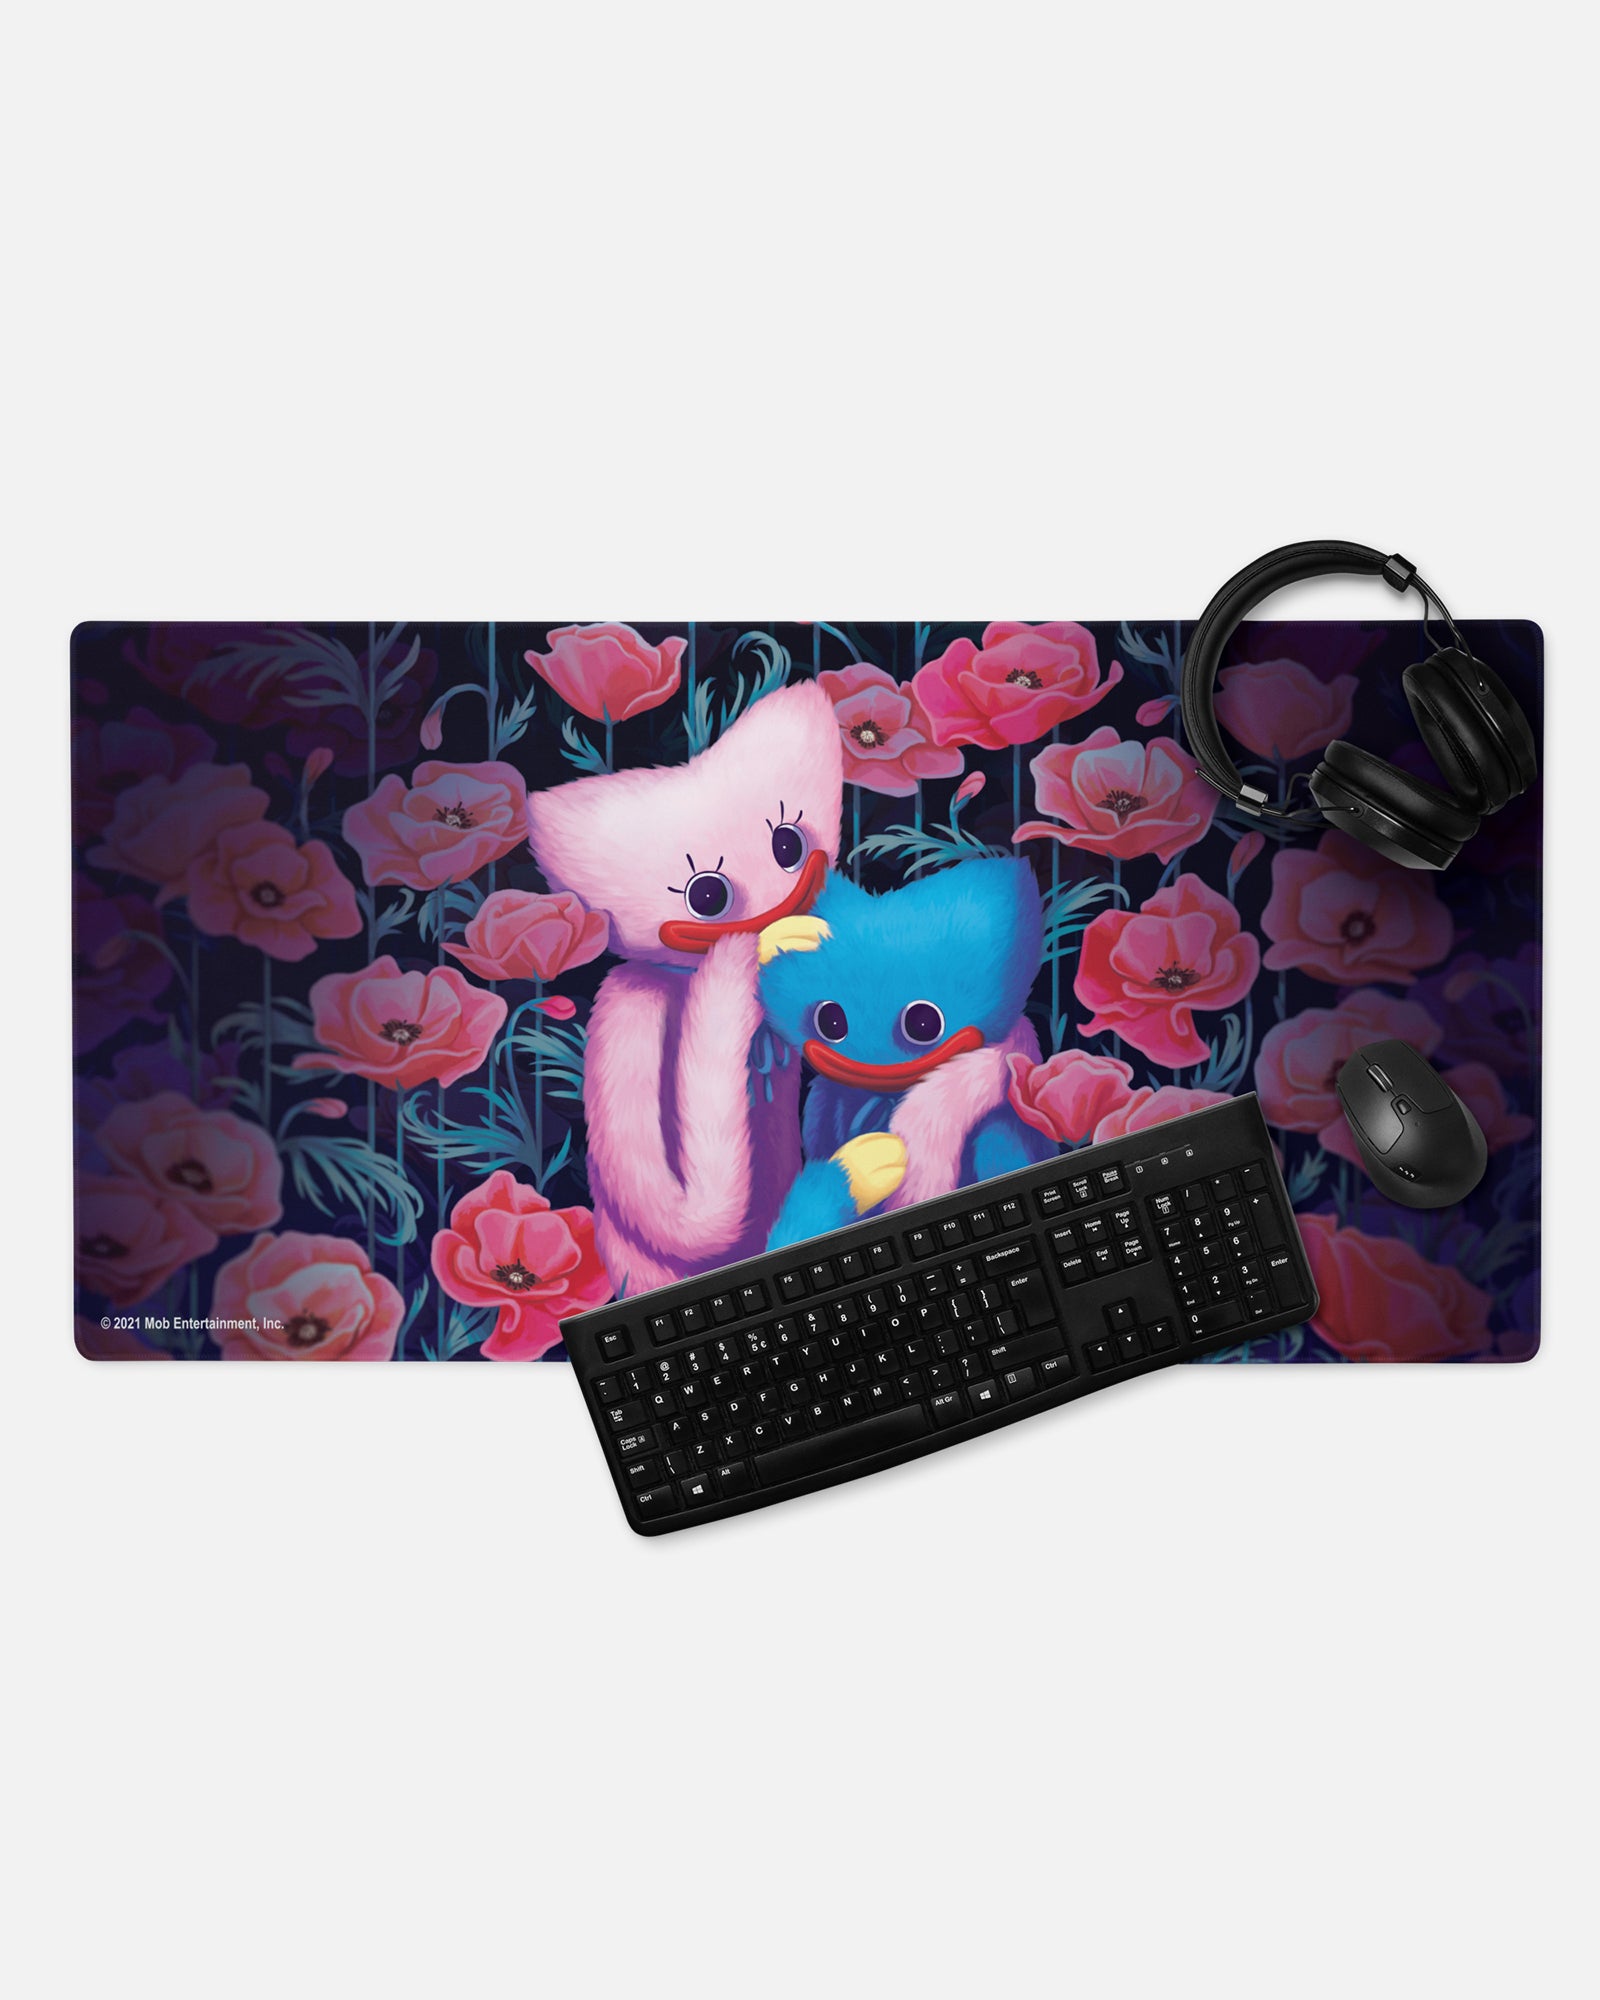 kissy missy huggy wuggy gamer mousepad with headphones, keyboard, and mouse to show example of gaming set up. image: kissy missy and huggy wuggy holding each other in a field of poppy flowers